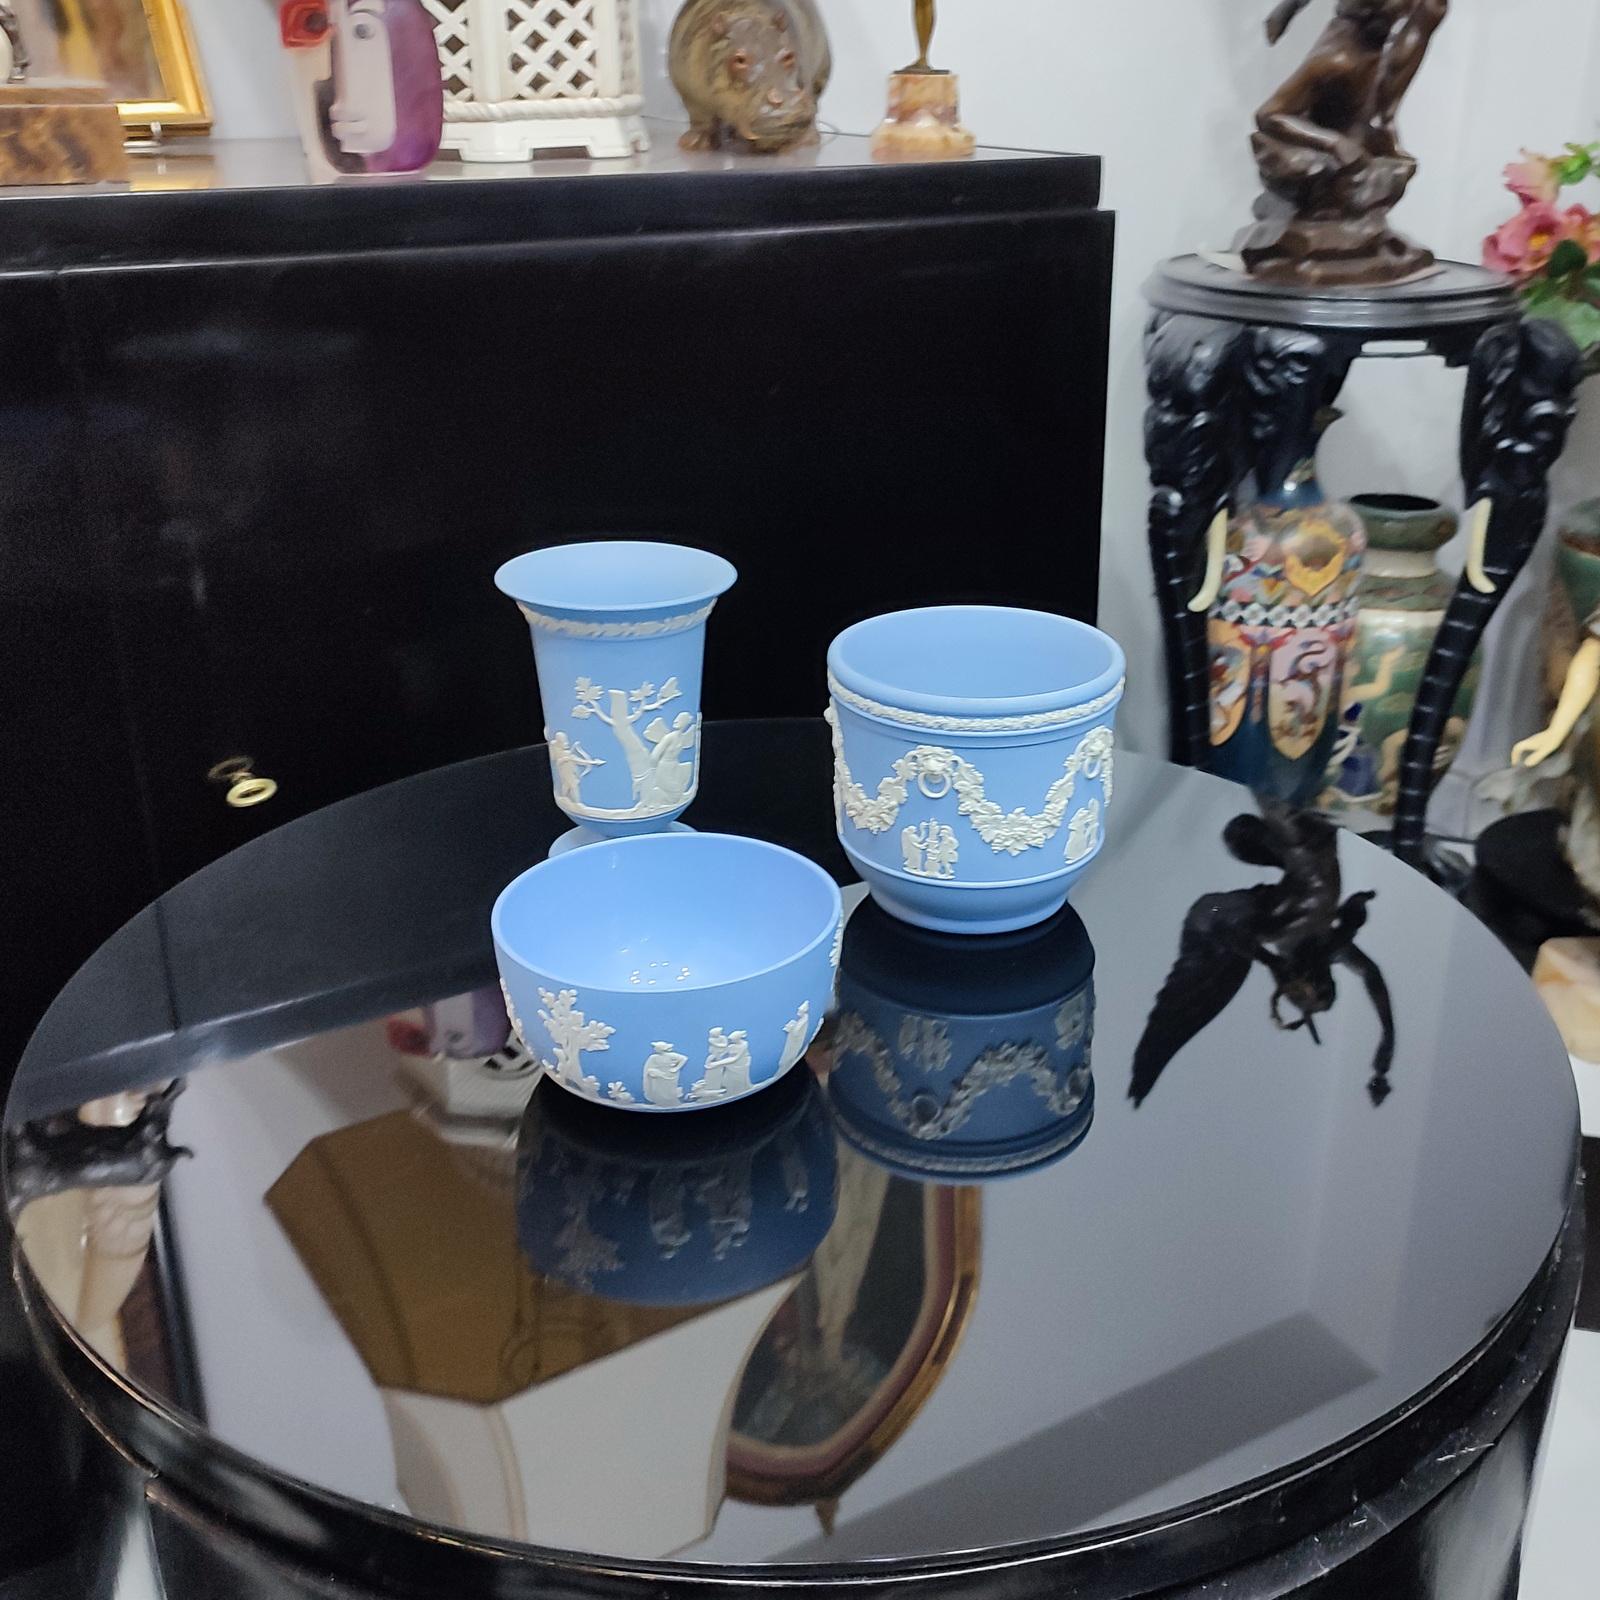 A lovely collection of Wedgwood Jasperware Pale Blue four pieces, comprising a vase, a bowl, and a cachepot. Made by Wedgwood in England in 1980s, marked/stamped on base.
Dimensions:
Vase H 14 cm, ⌀ 10cm
Bowl H 6.5 cm, ⌀ 12.5 cm
Planter H 11.5 cm, ⌀